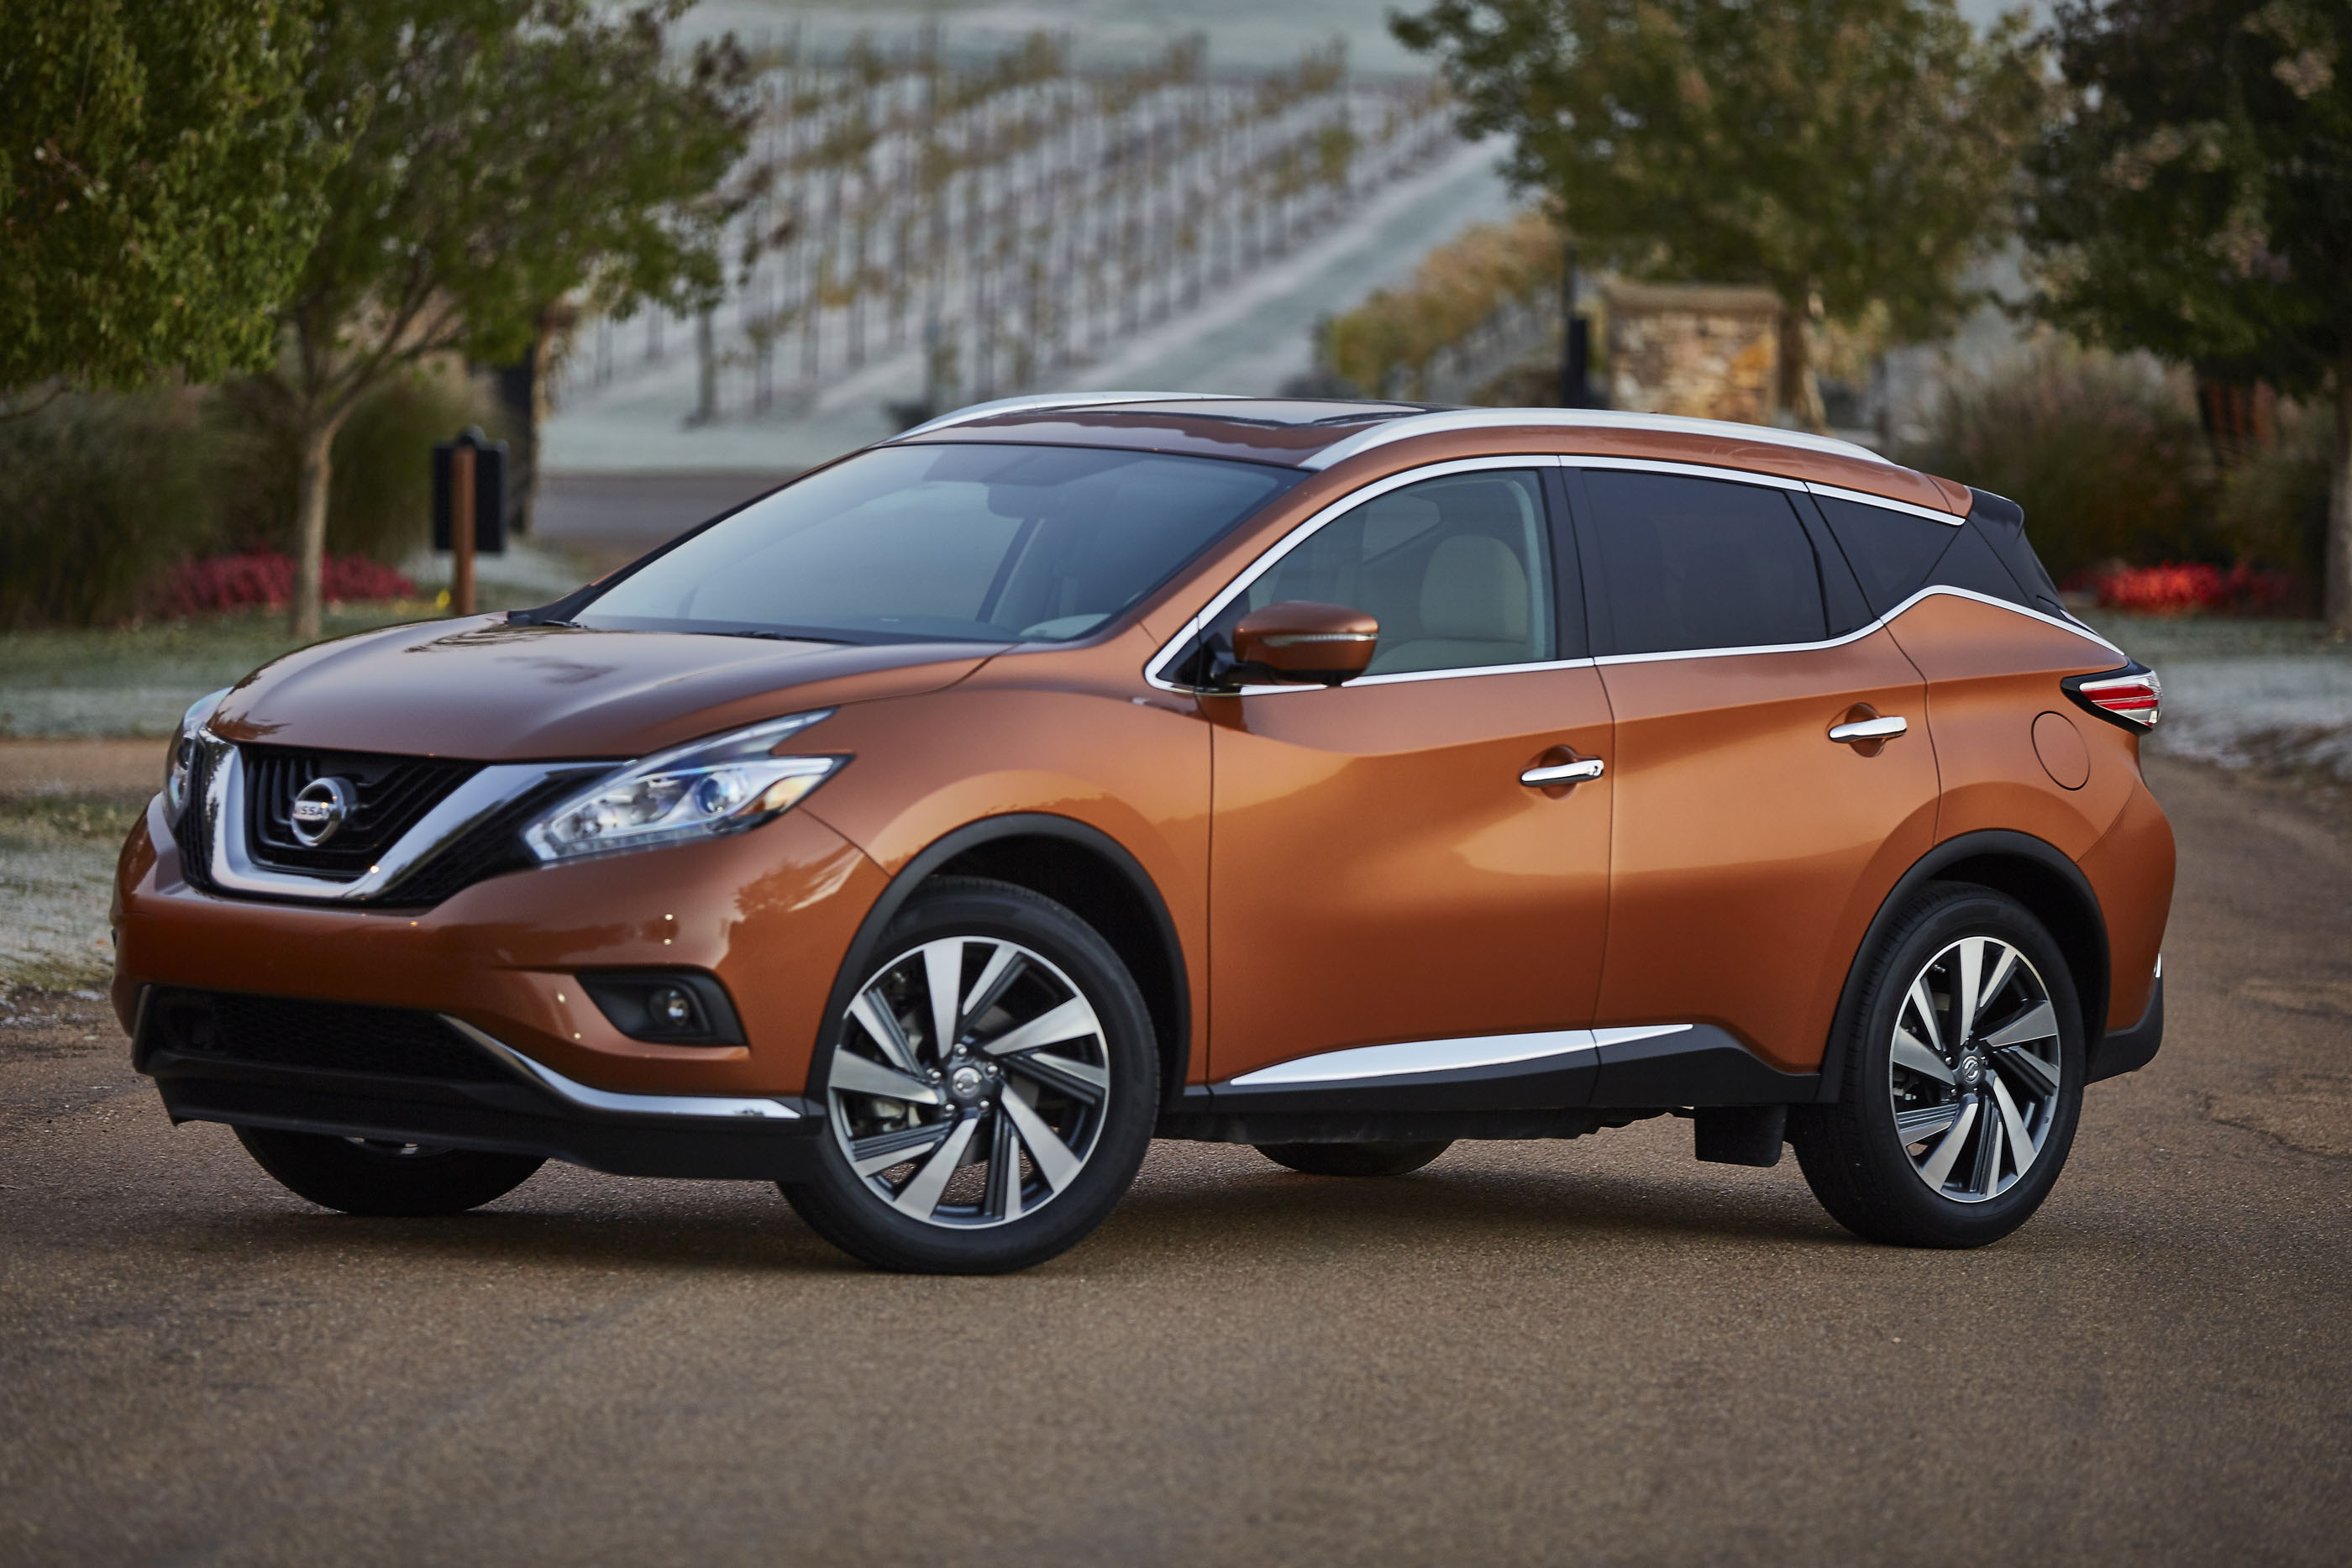 2017 Nissan Murano Safety Review and Crash Test Ratings - The Car Connection2800 x 1867